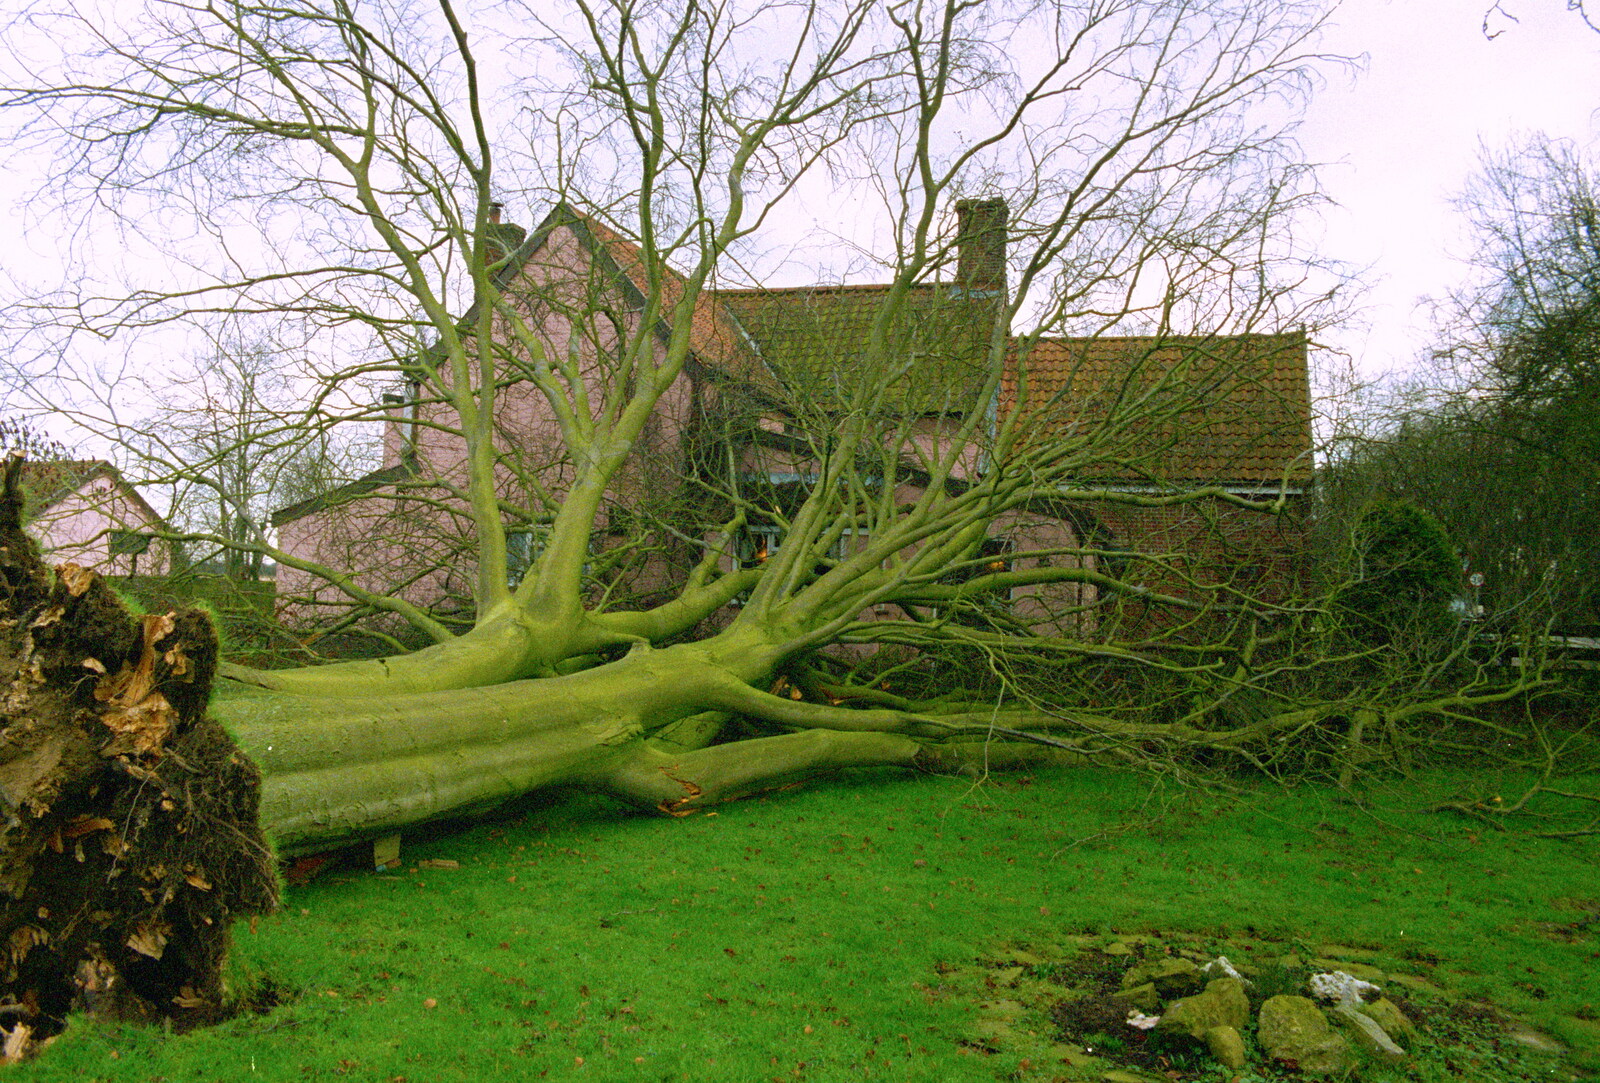 Another view of the fallen tree from A Fallen Tree at The Swan Inn, Brome, Suffolk - January 21st 2001